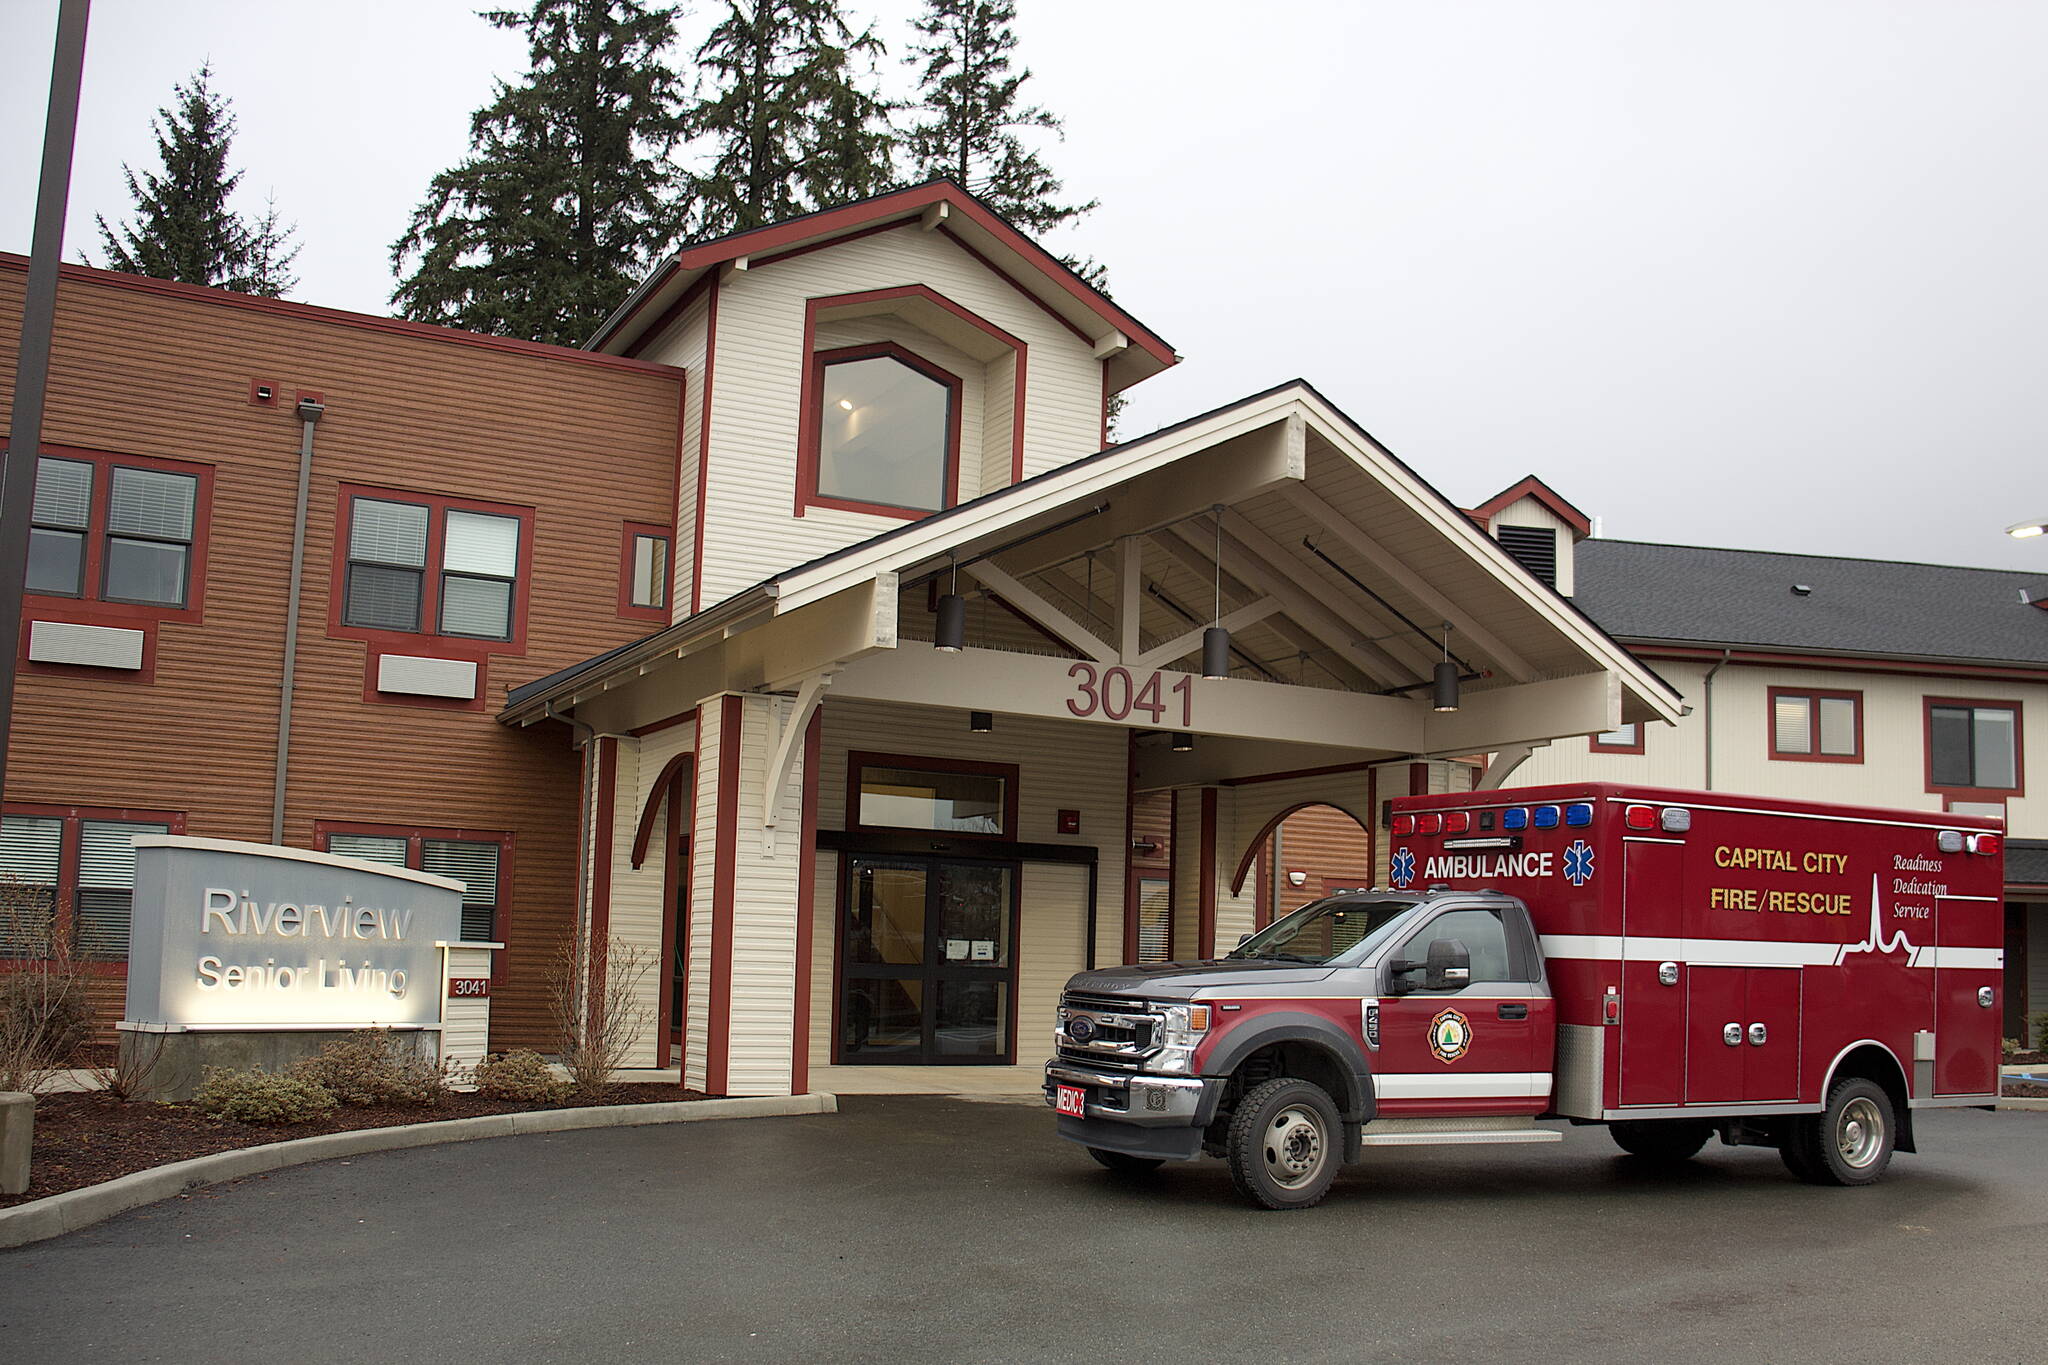 An emergency rescue vehicle parks in front of the Riverview Senior Living center at midday Monday after resident Nathan Bishop, 58, was discovered in the attic about 40 hours after he was reported missing. (Mark Sabbatini / Juneau Empire)